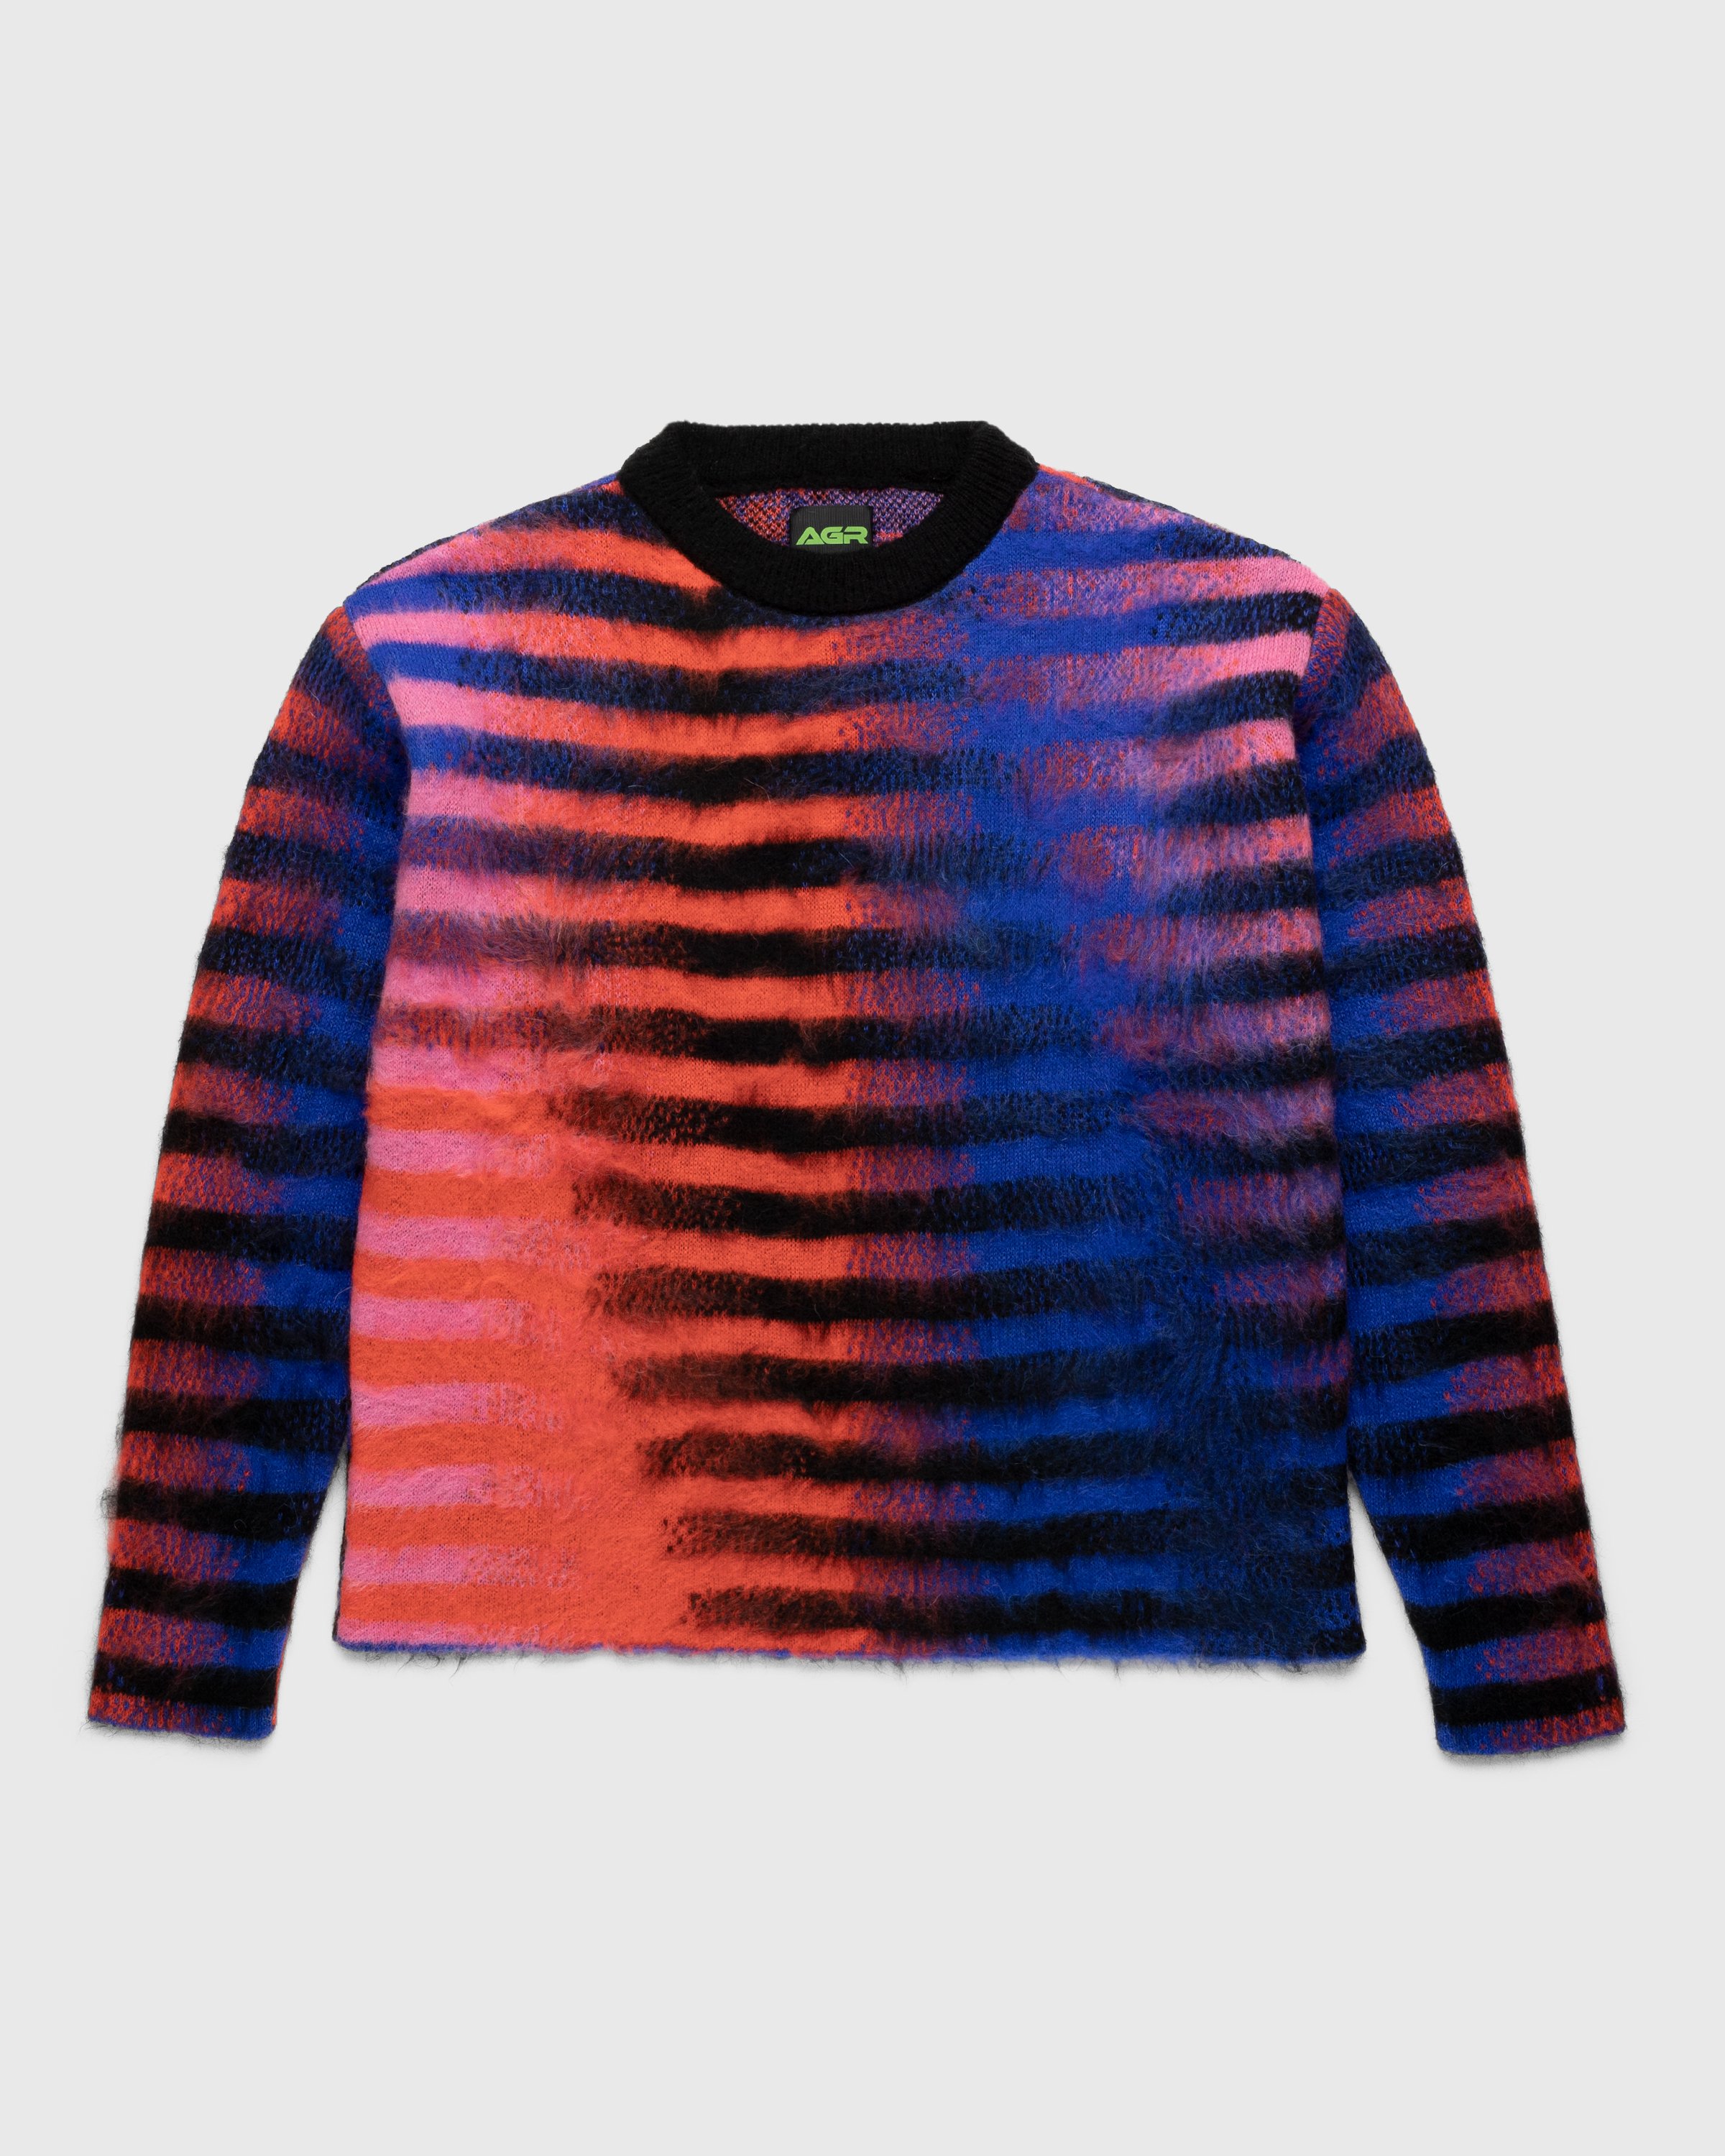 AGR - Striped Mohair Crewneck Sweater Red/Blue - Clothing - Multi - Image 1